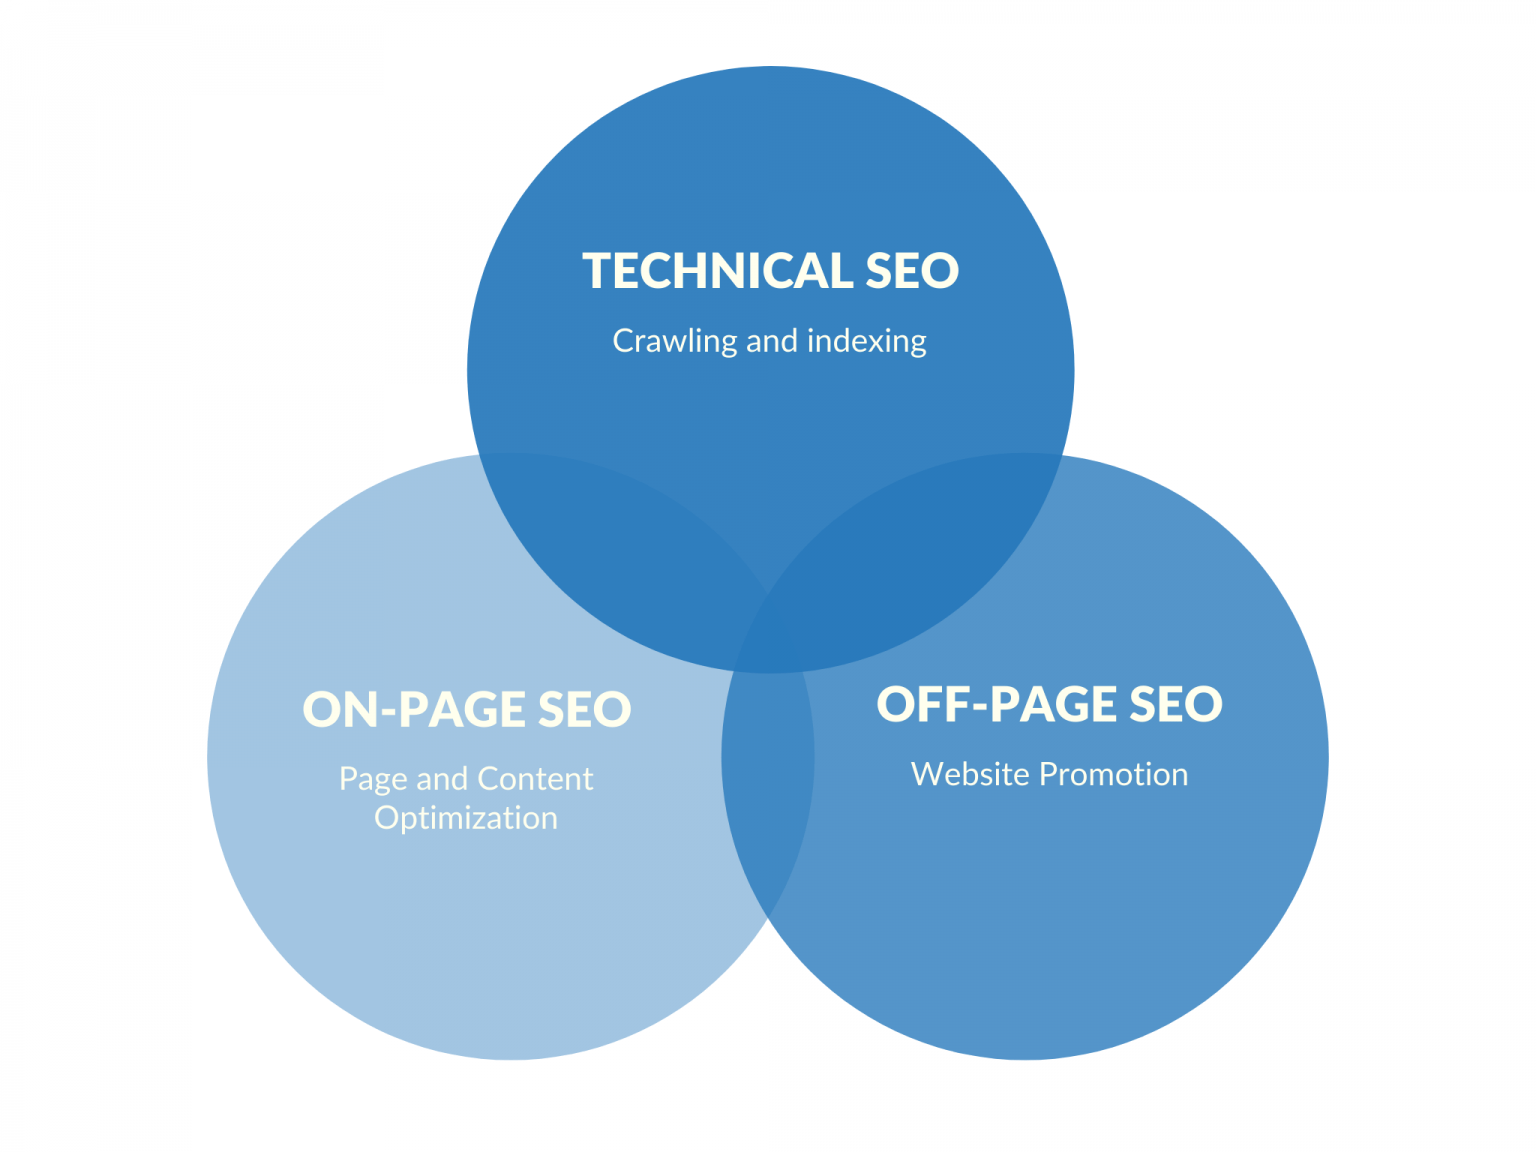 On-Page SEO - Search Engine Optimization